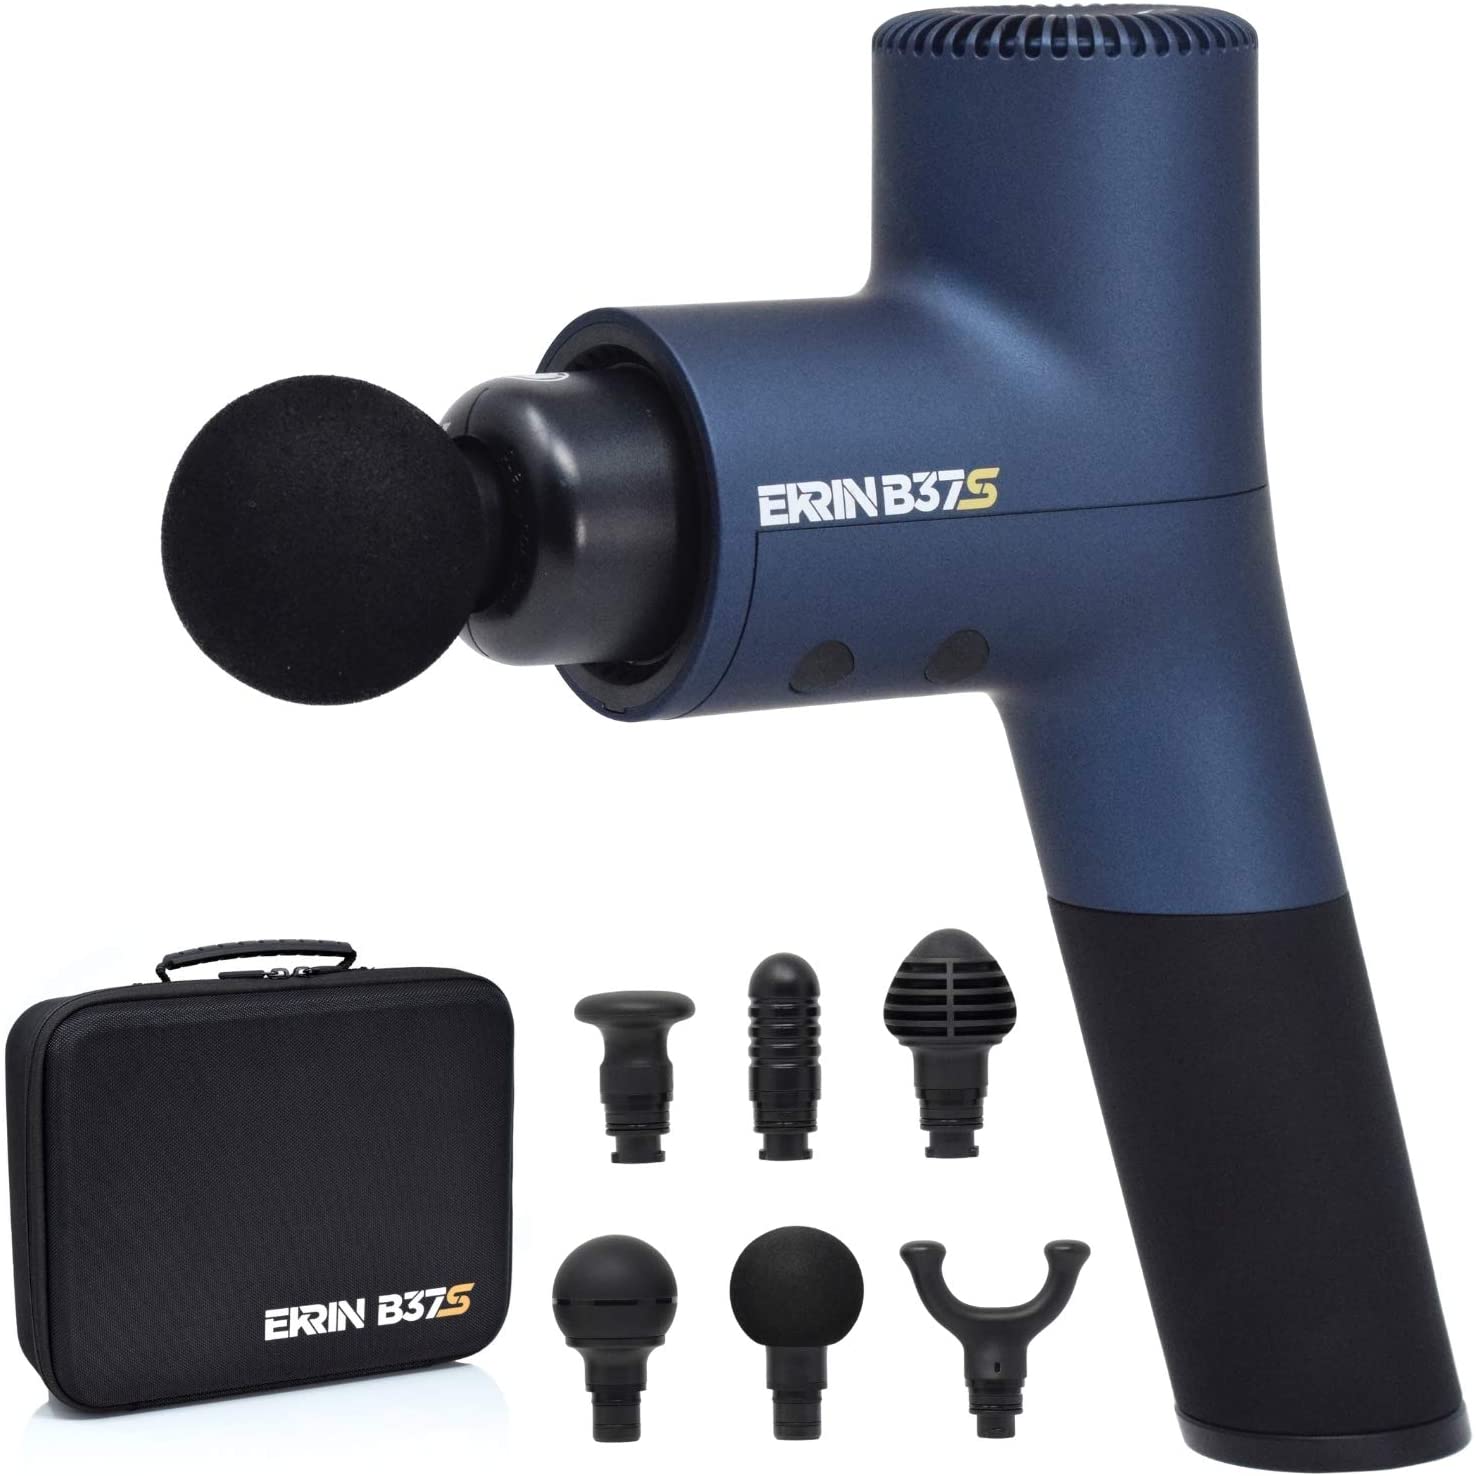 Ekrin Athletics B37S Massage Gun - Percussion Massager for Sore Muscles & Recovery with 5 Speeds / 6 Attachments / Move Better & Recover Faster